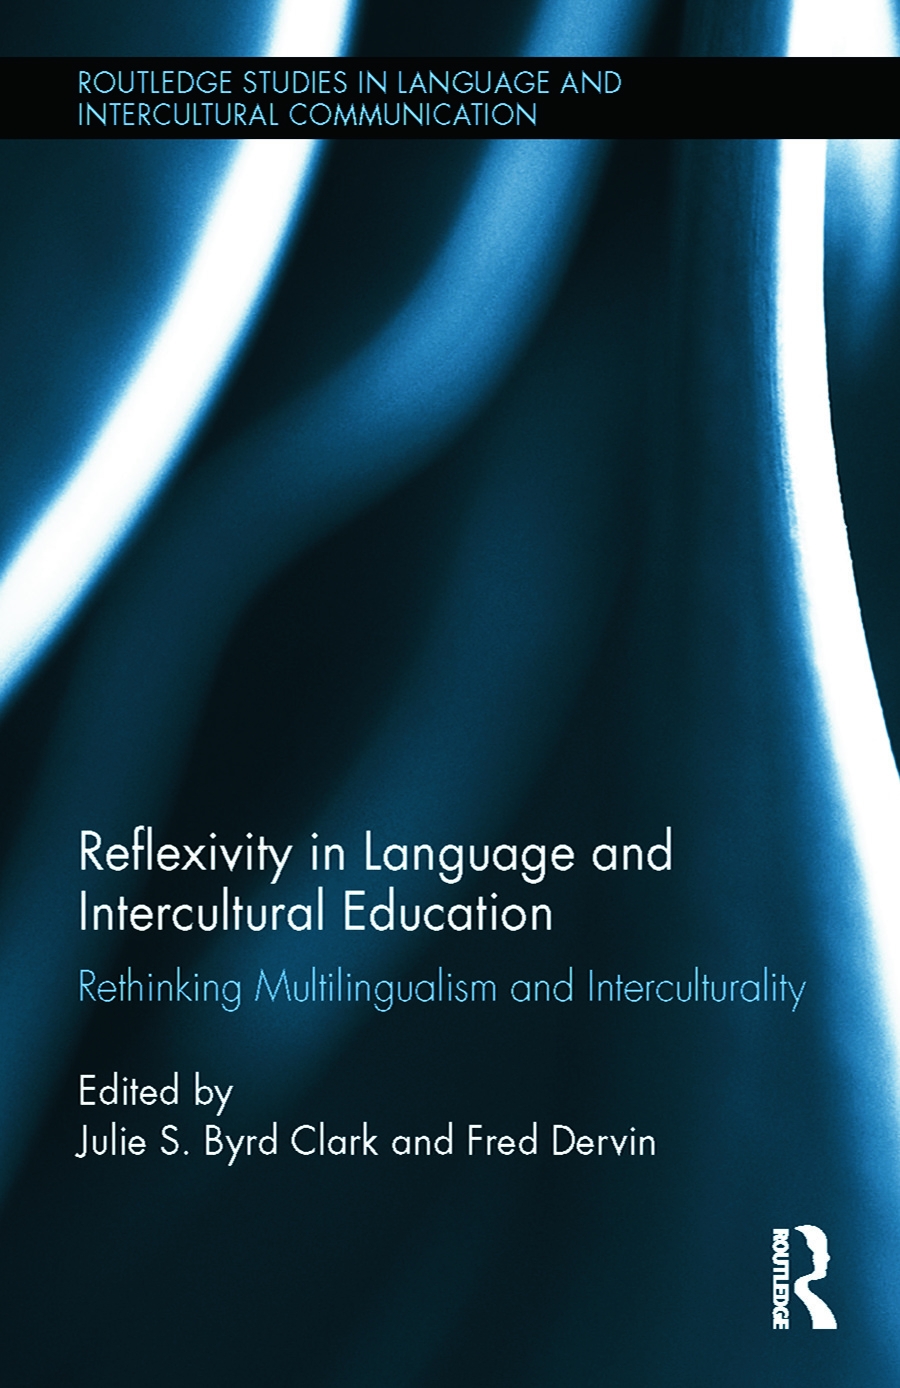 Reflexivity in Language and Intercultural Education: Rethinking Multilingualism and Interculturality